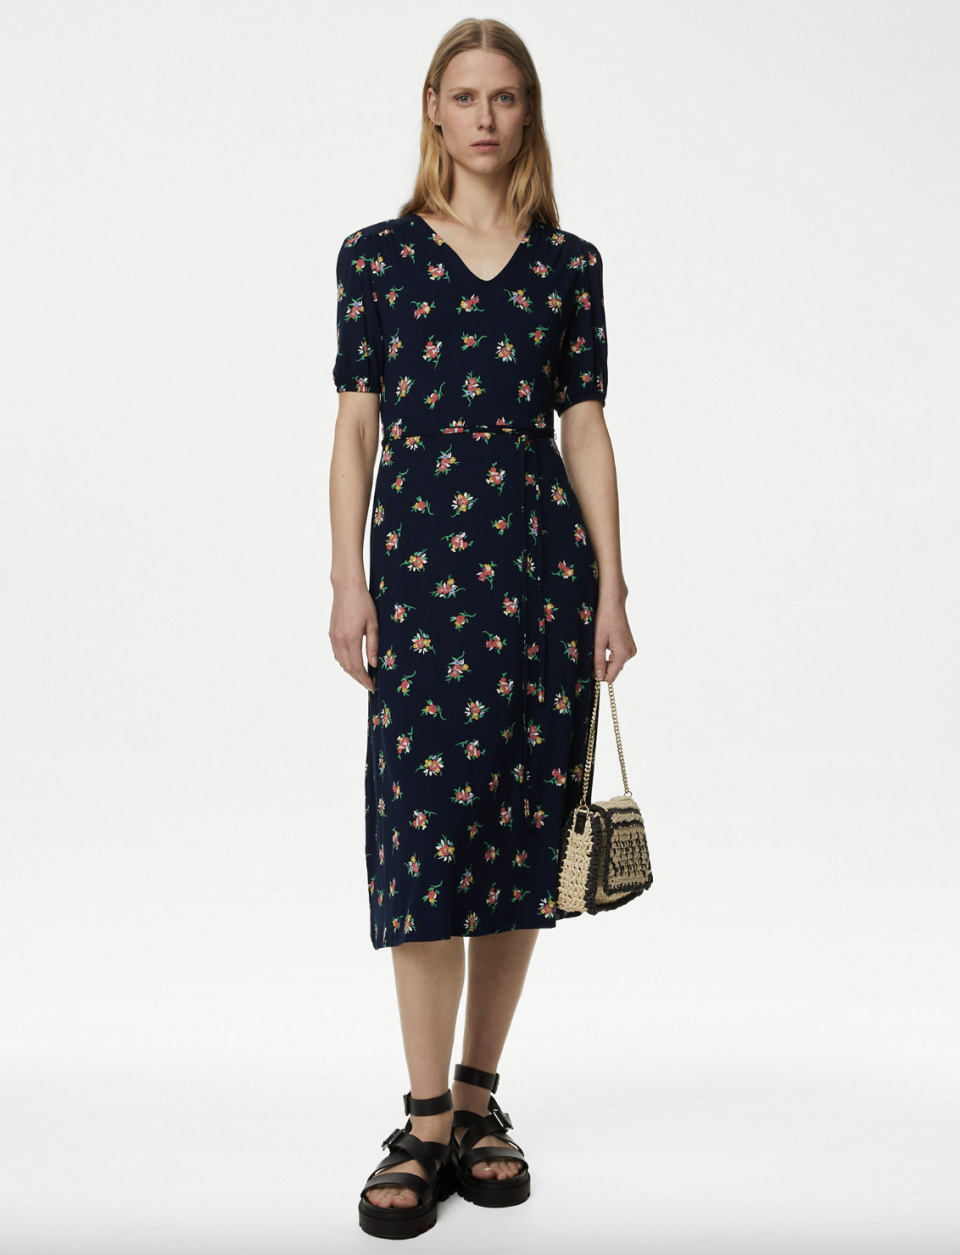 Perfect for weddings, BBQs and the office, you can't go wrong with this midi style. (Marks & Spencer)